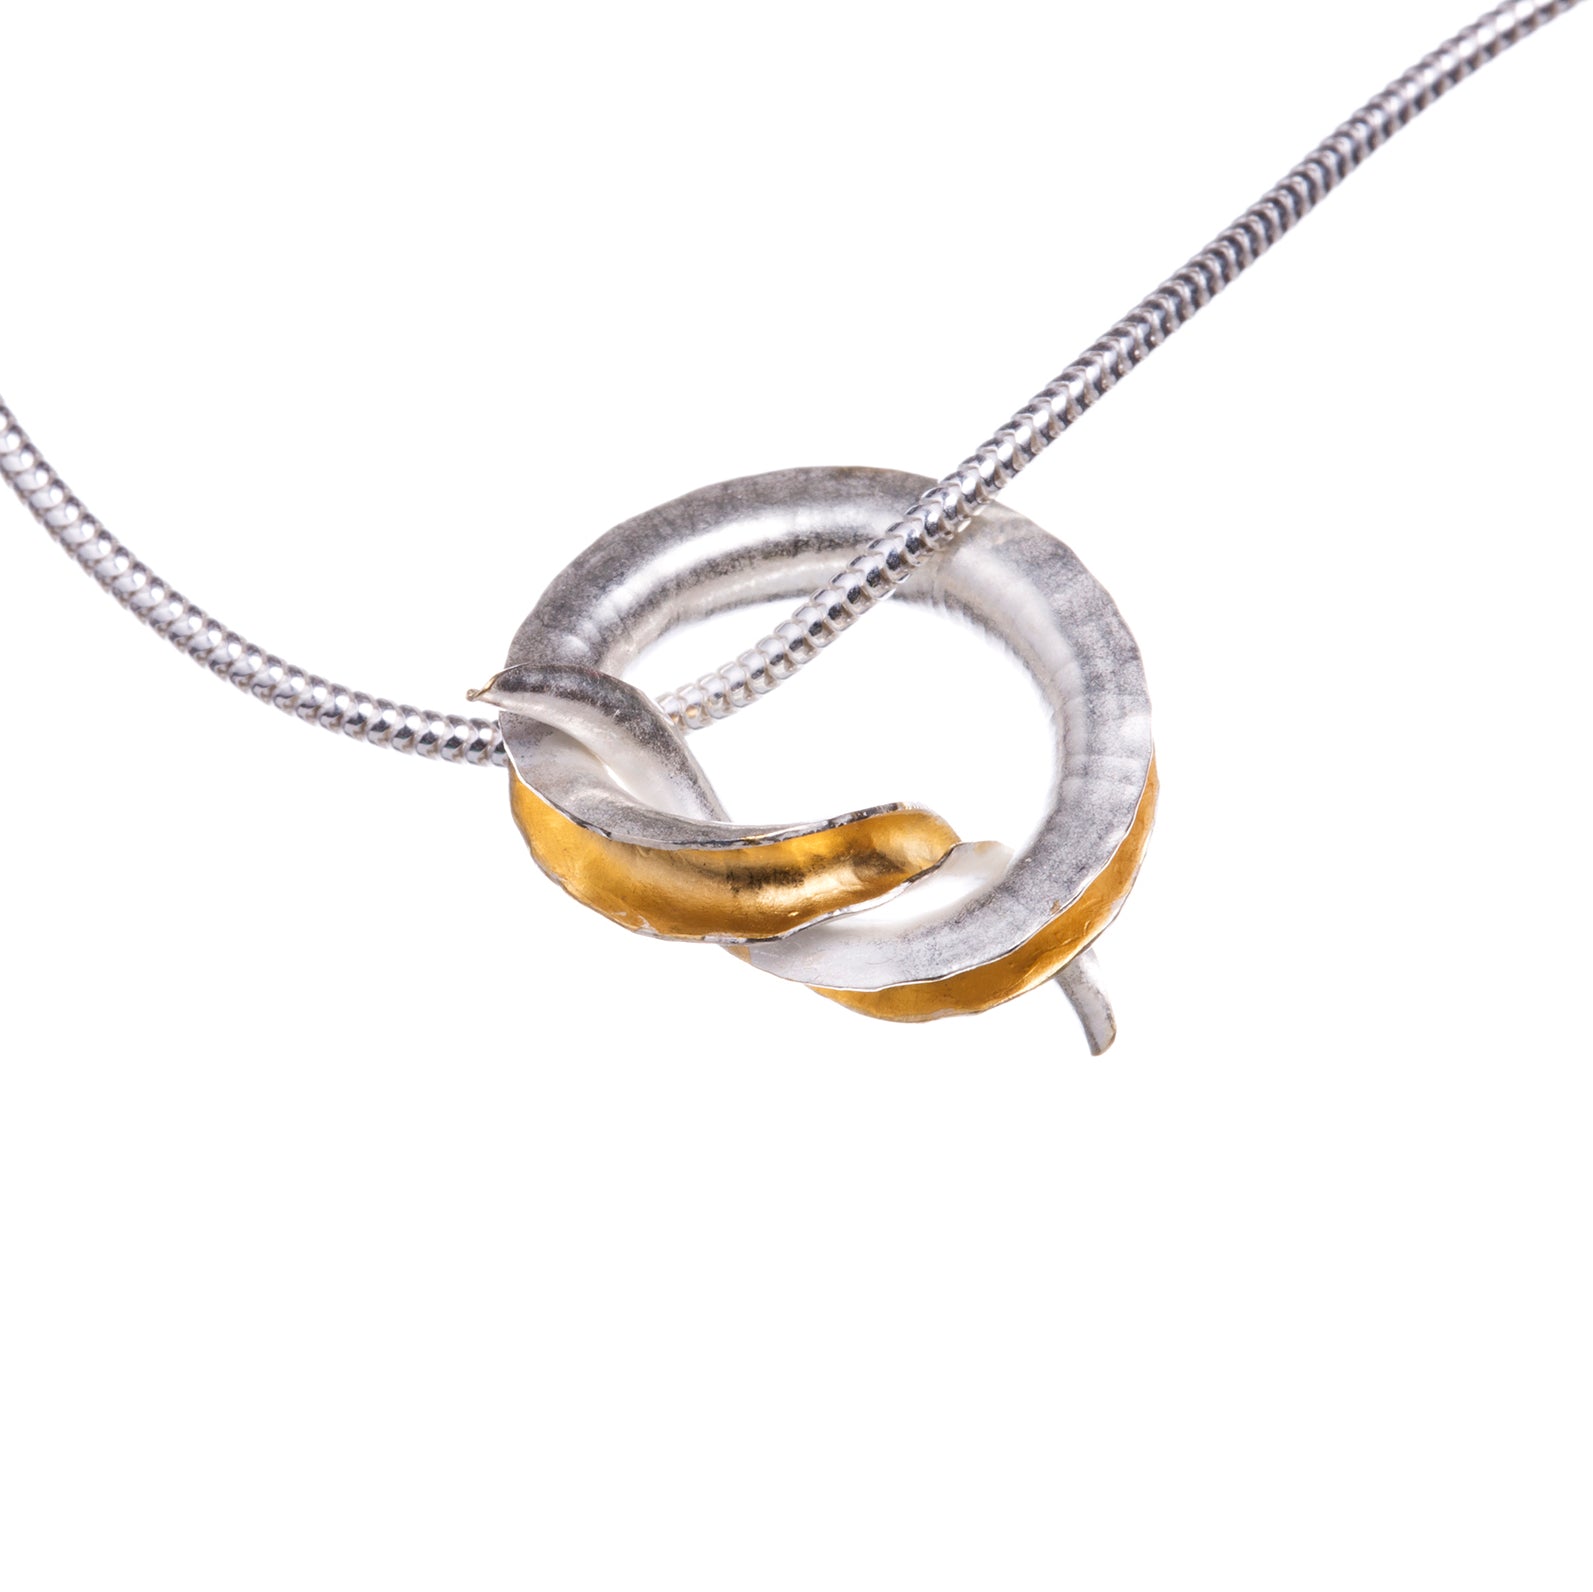 A silver pendant in the shape of a knot, in the form of a tube open down one side and gold plated on the inside, hanging from a silver snake chain.